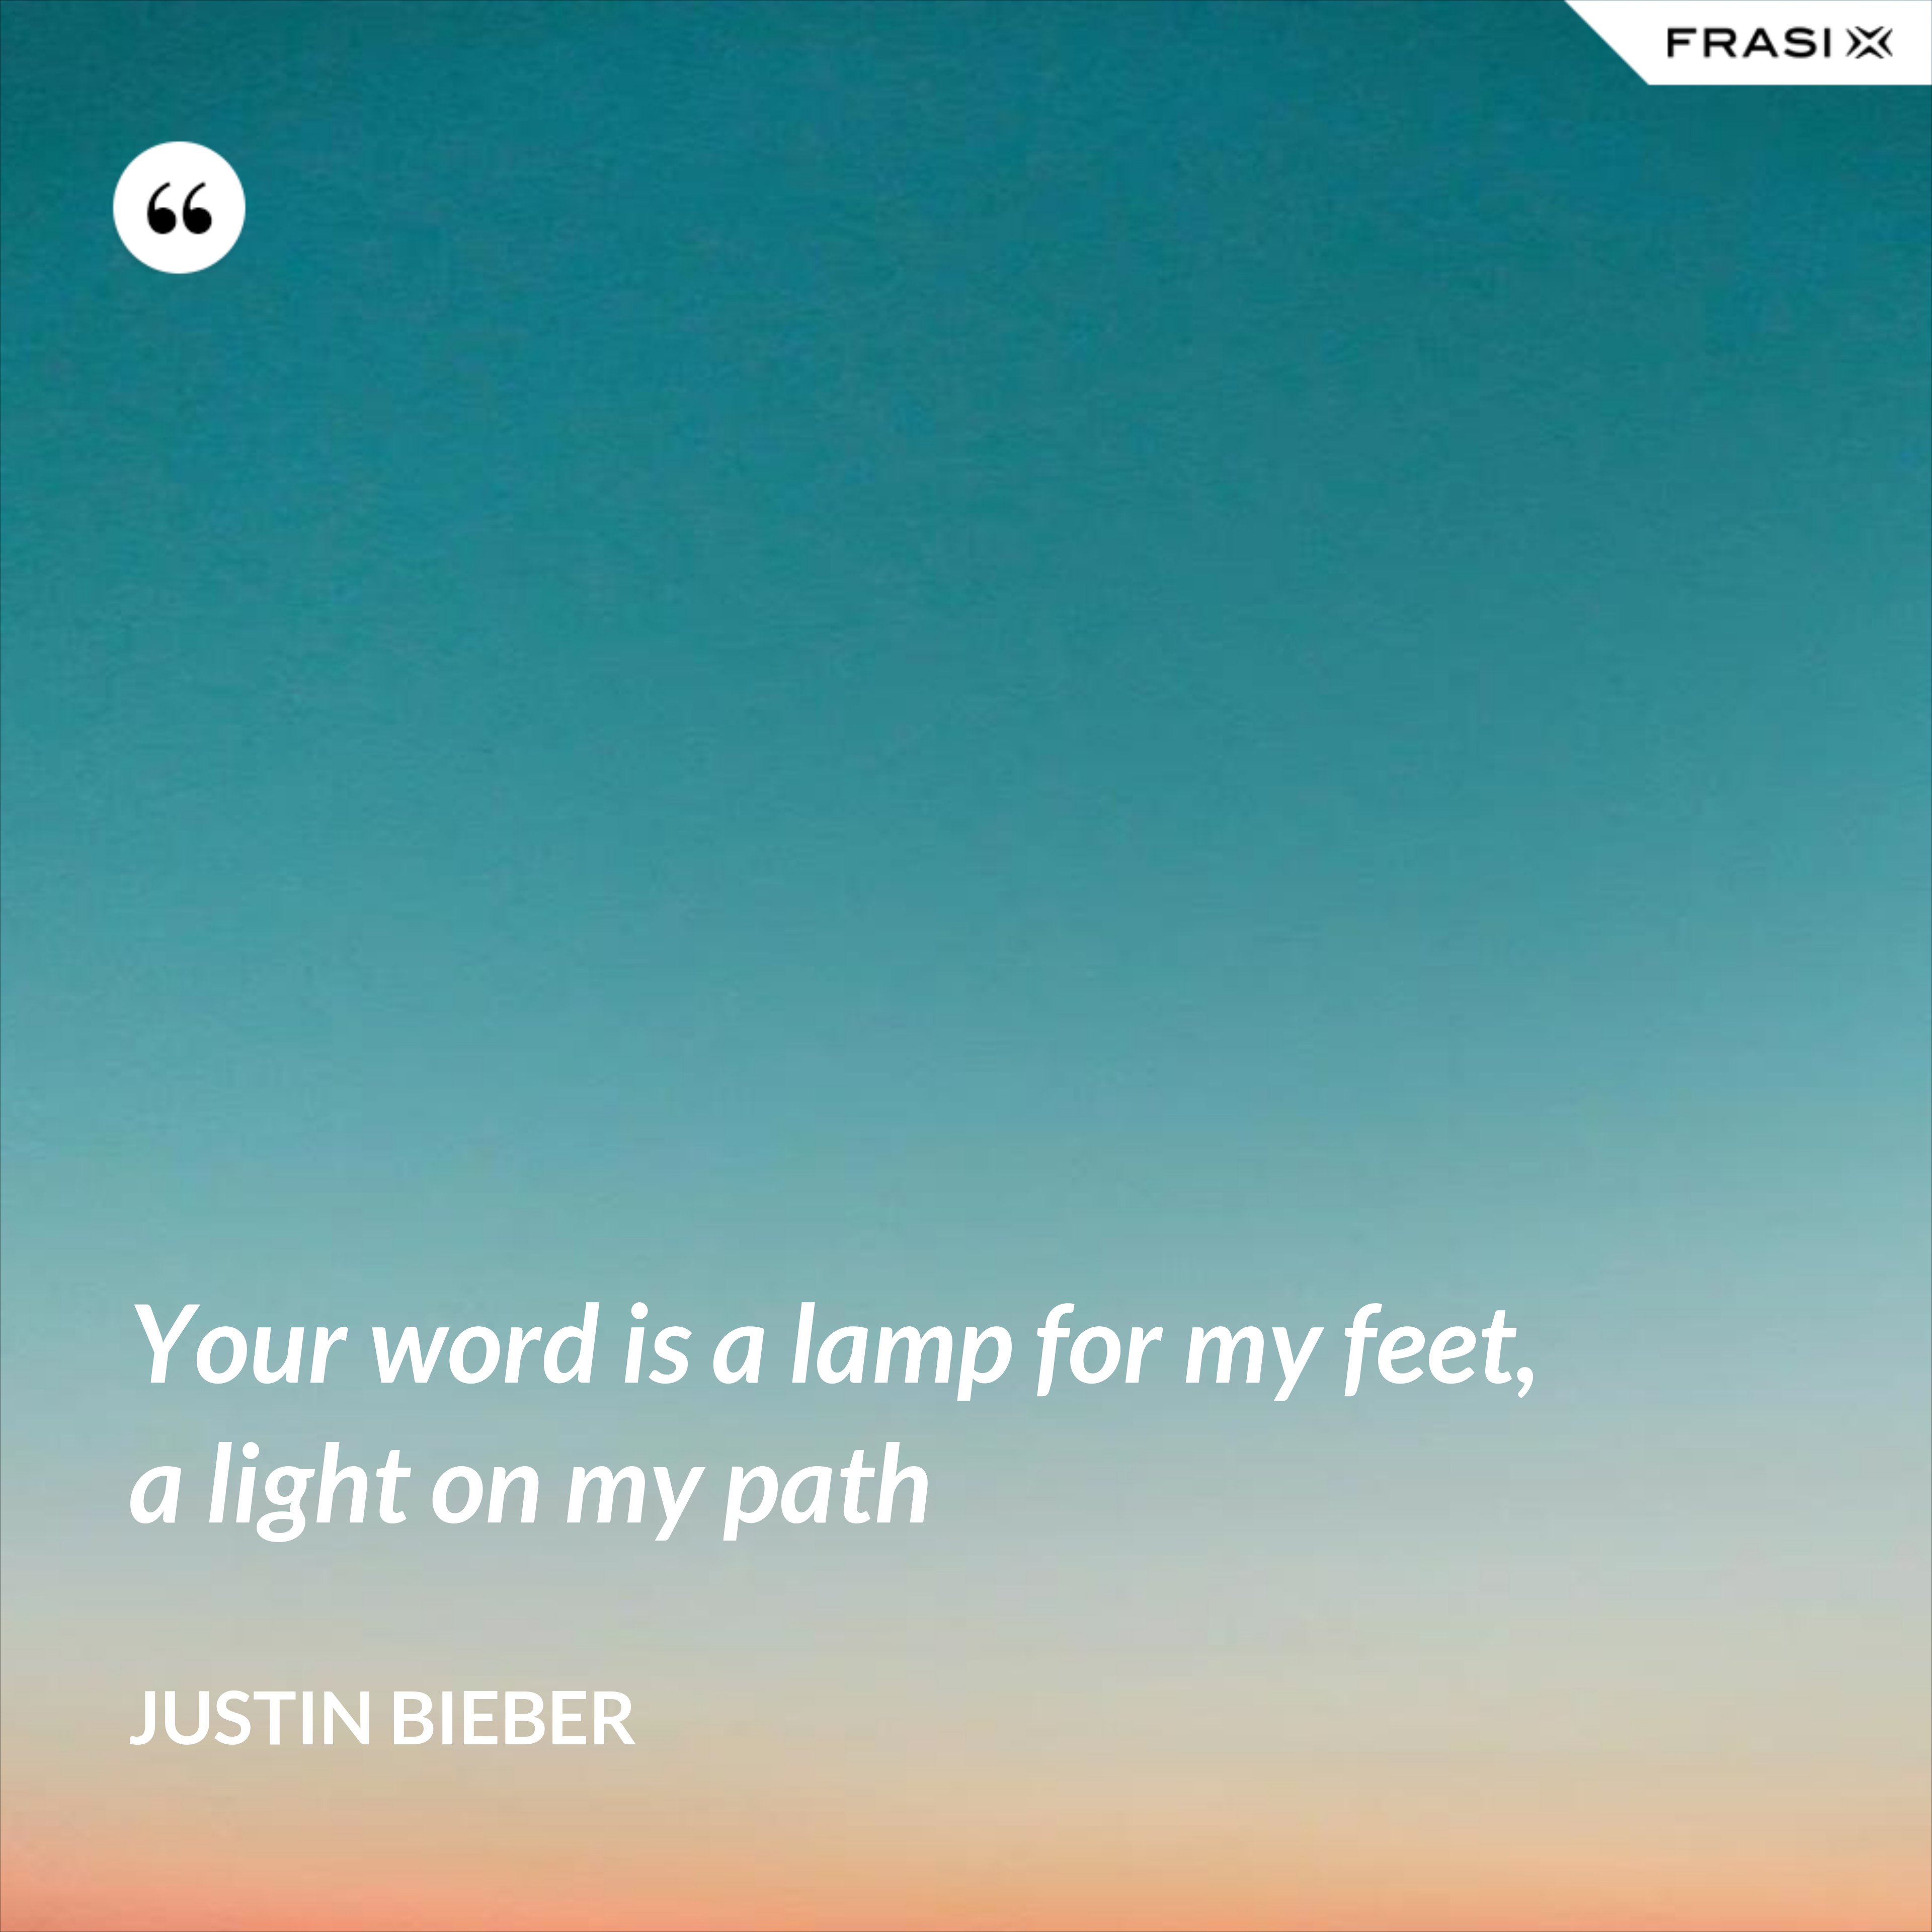 Your word is a lamp for my feet, a light on my path - Justin Bieber